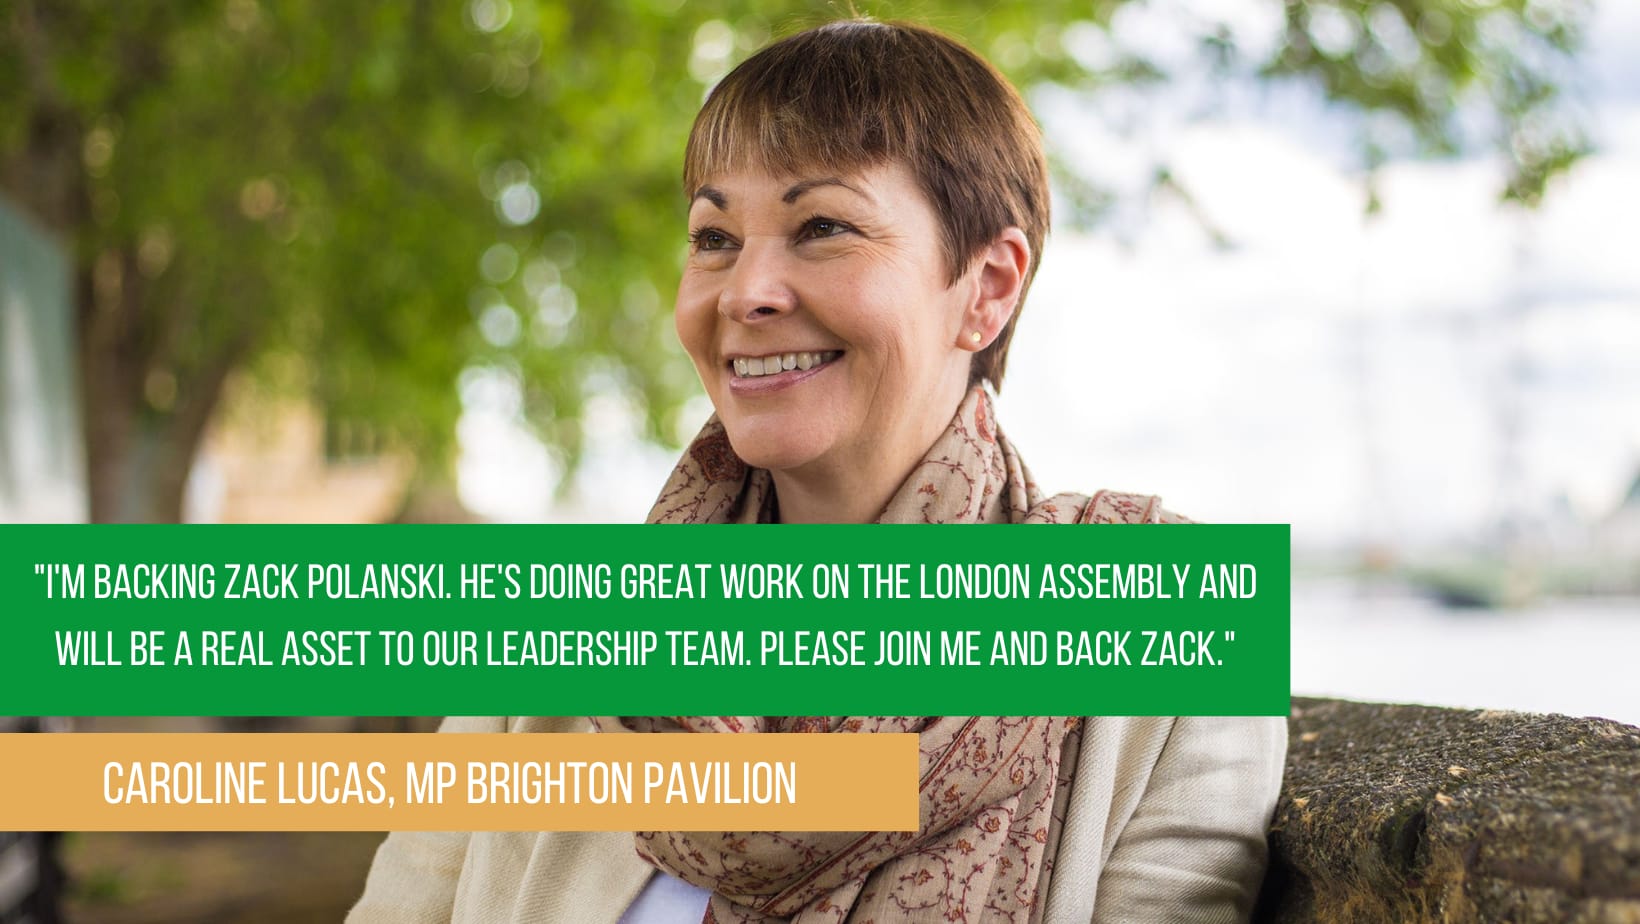 Caroline Lucas smiling with text overlay endorsing Zack. Quote "I'm backing Zack Polanski. He's doing great work on the London Assembly and will be a real asst to our leadership team. Please join me and Back Zack."